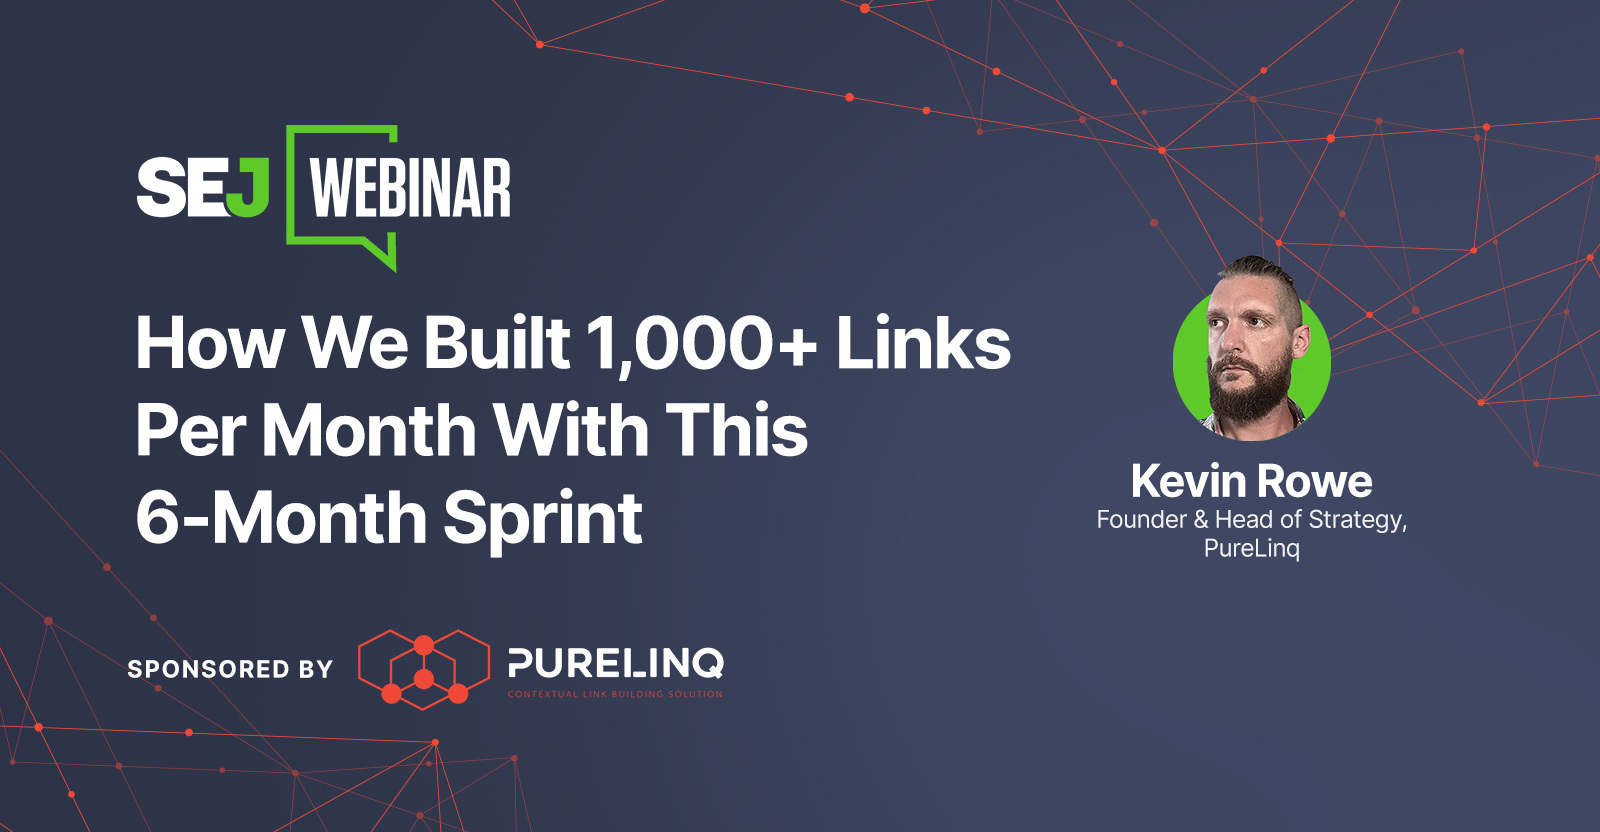 A 6-Month Sprint To A Strong Backlink Profile